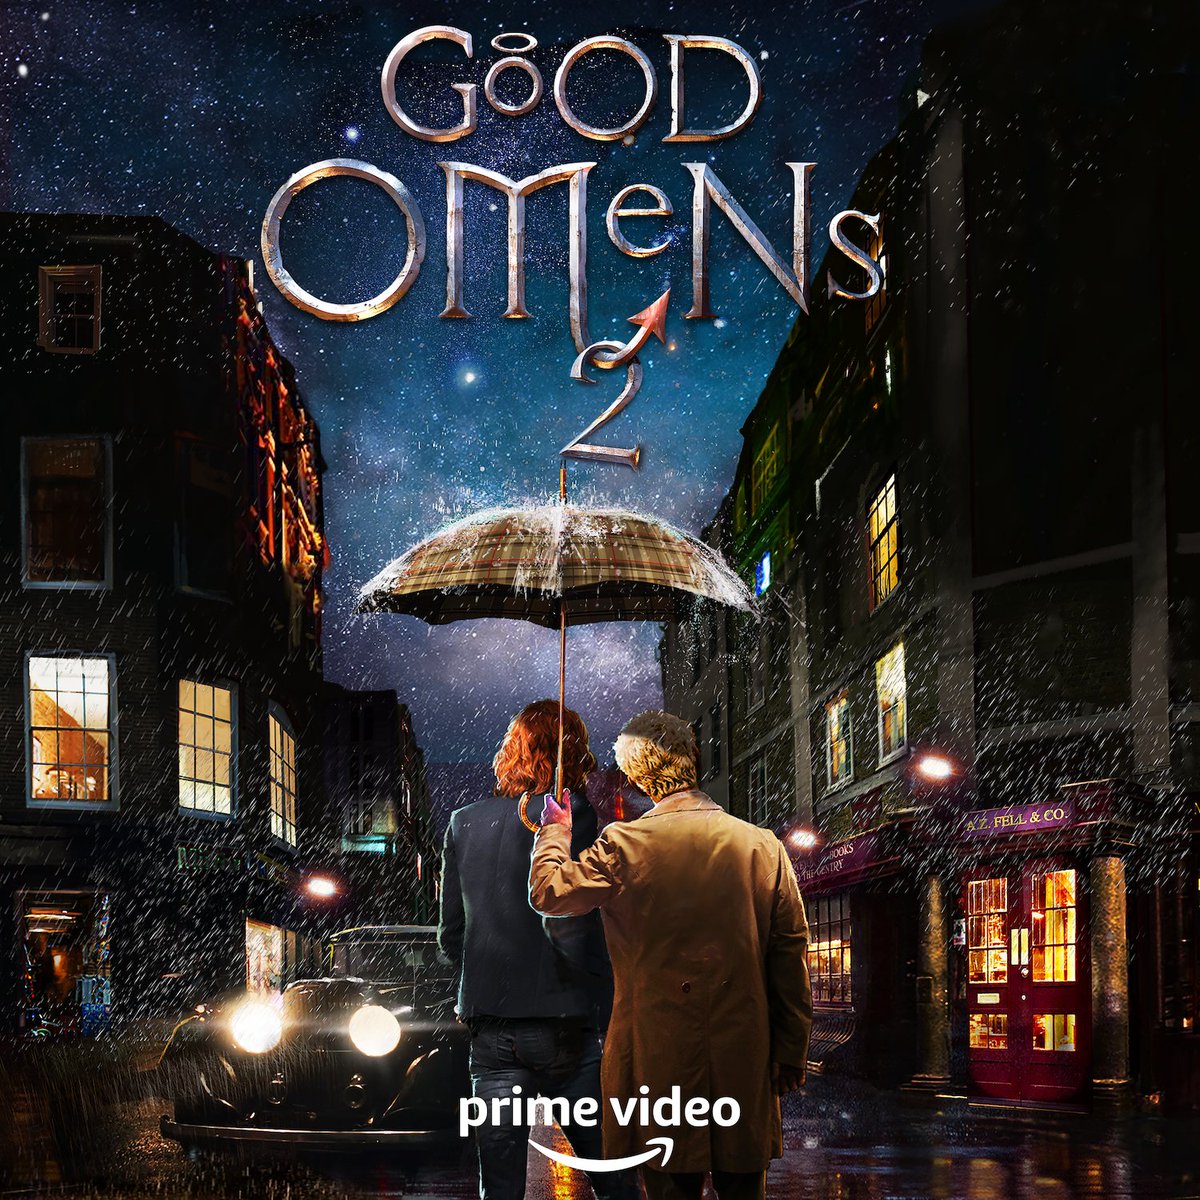 What glorious (and dangerous) trouble will our favorite angel and demon find themselves in this time? 😇😈 Good news! #GoodOmens is returning for Season 2 on @PrimeVideo.